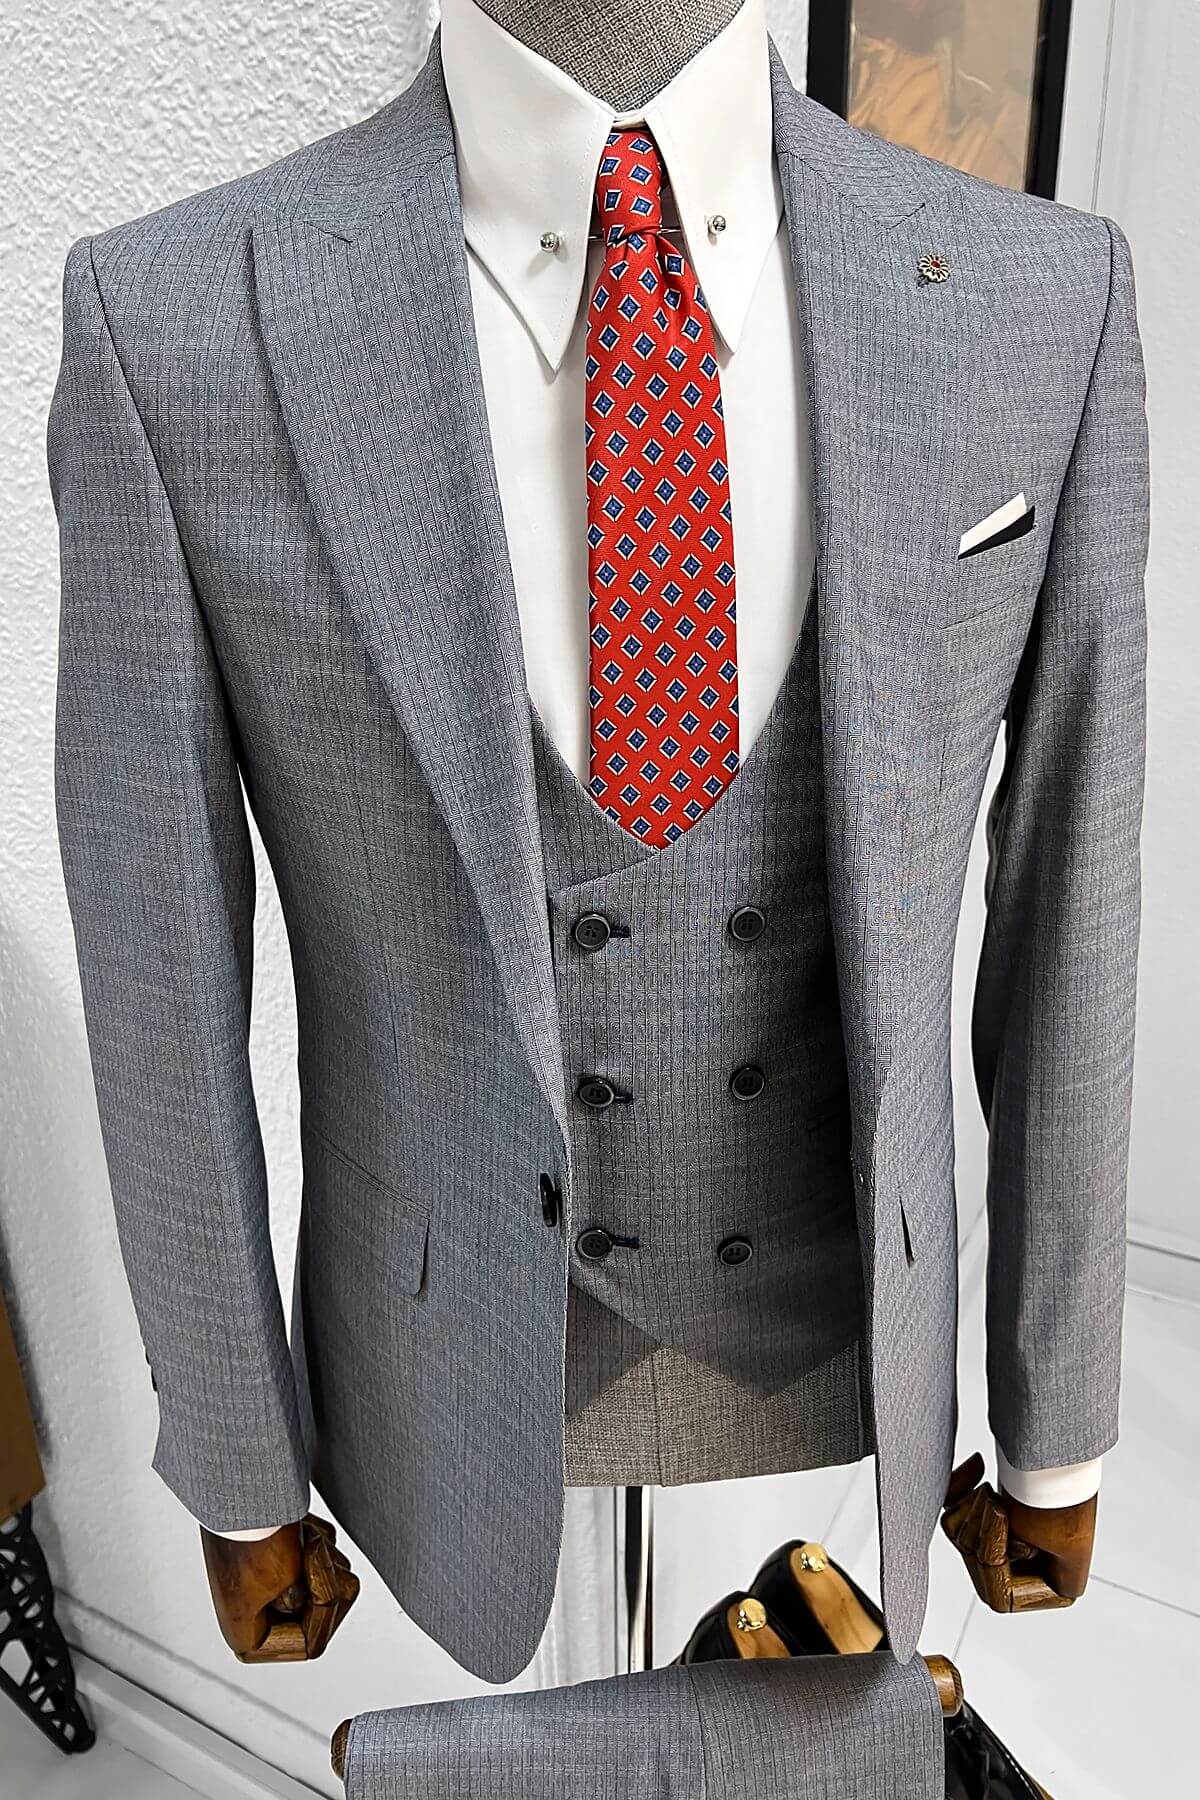 A Slim-fit Gray&Navyblue Wool Suit on display